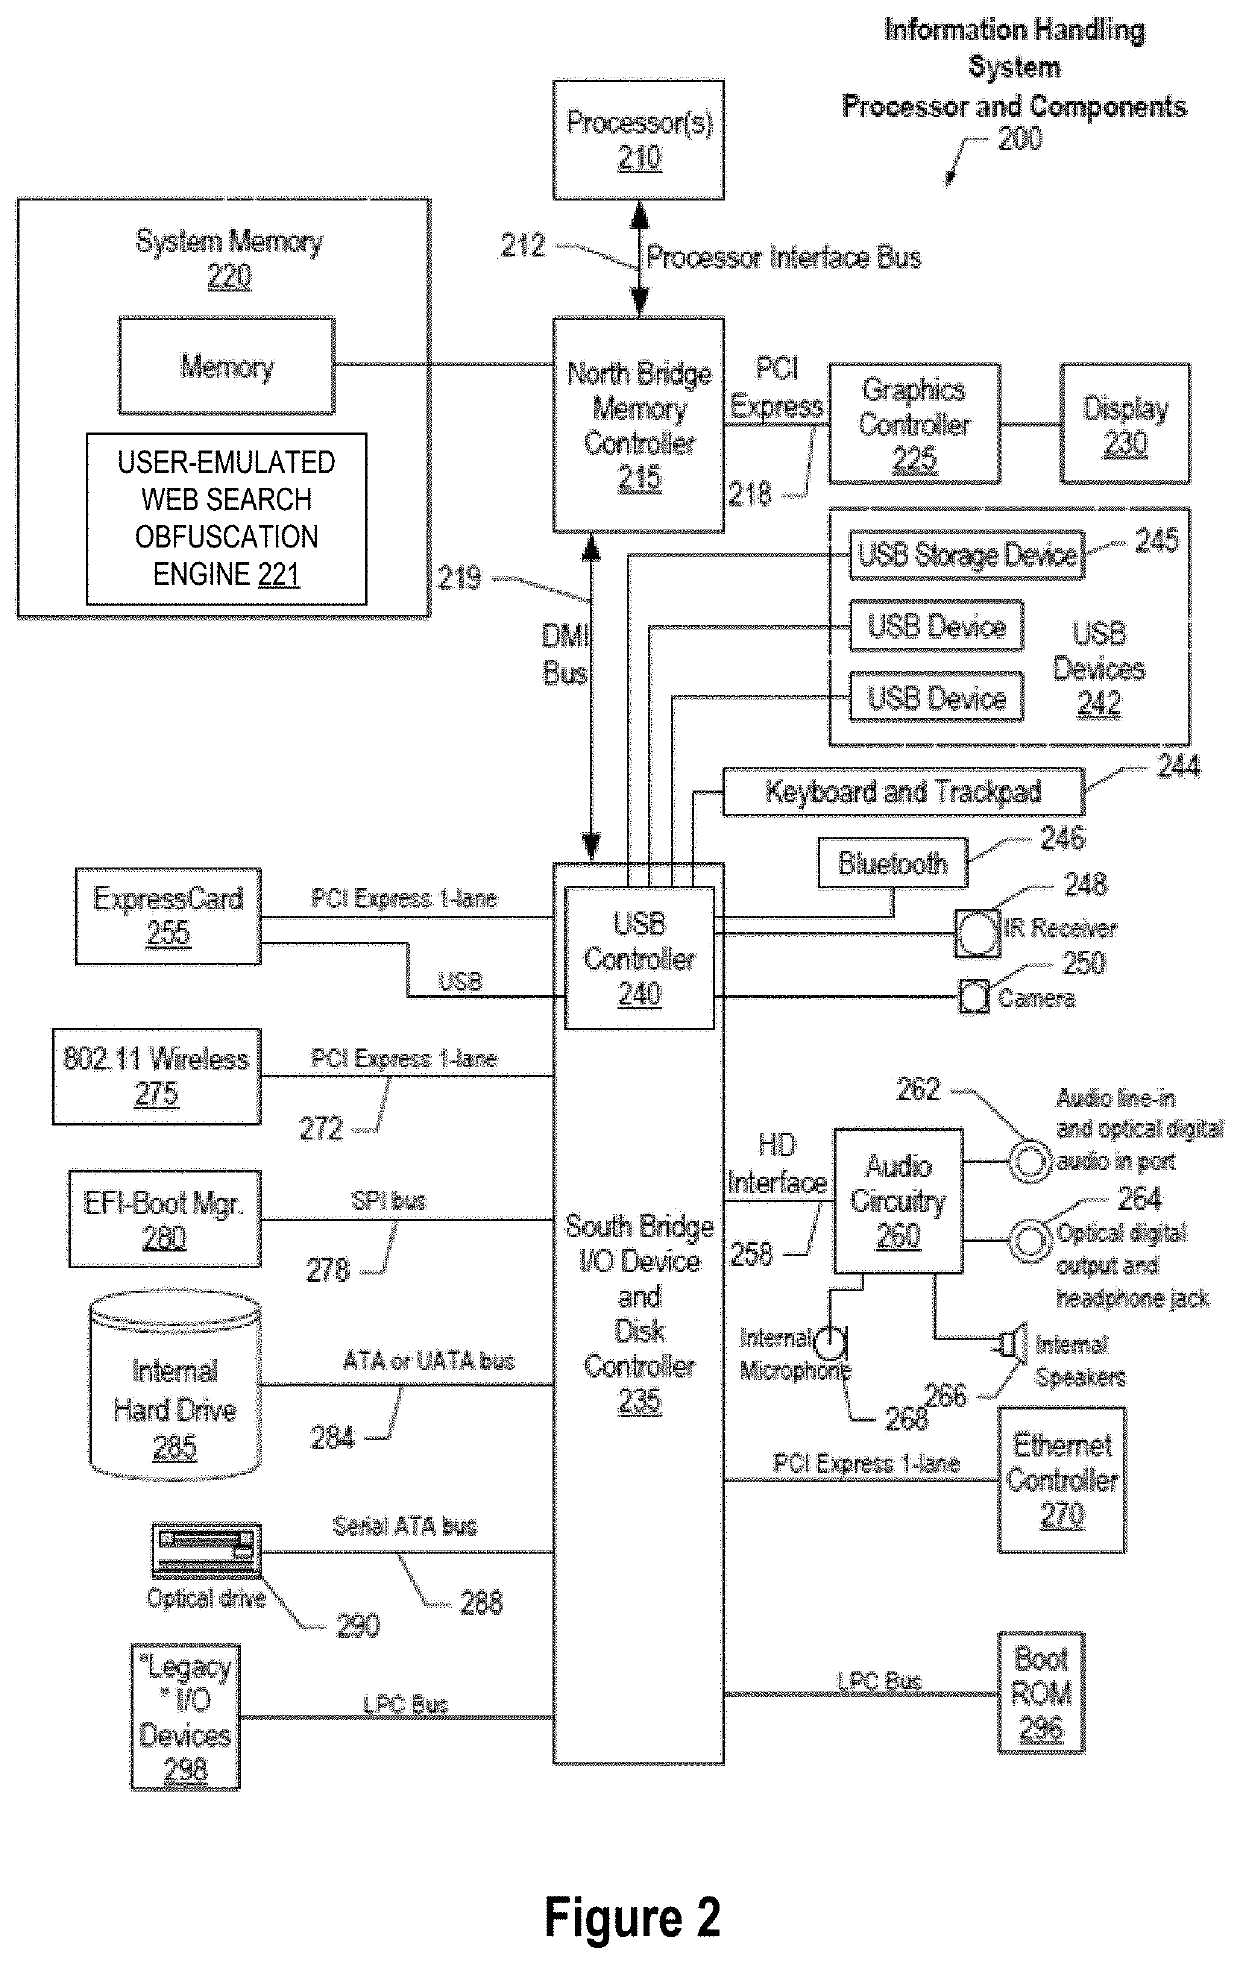 System and method for monitoring user searches to obfuscate web searches by using emulated user profiles